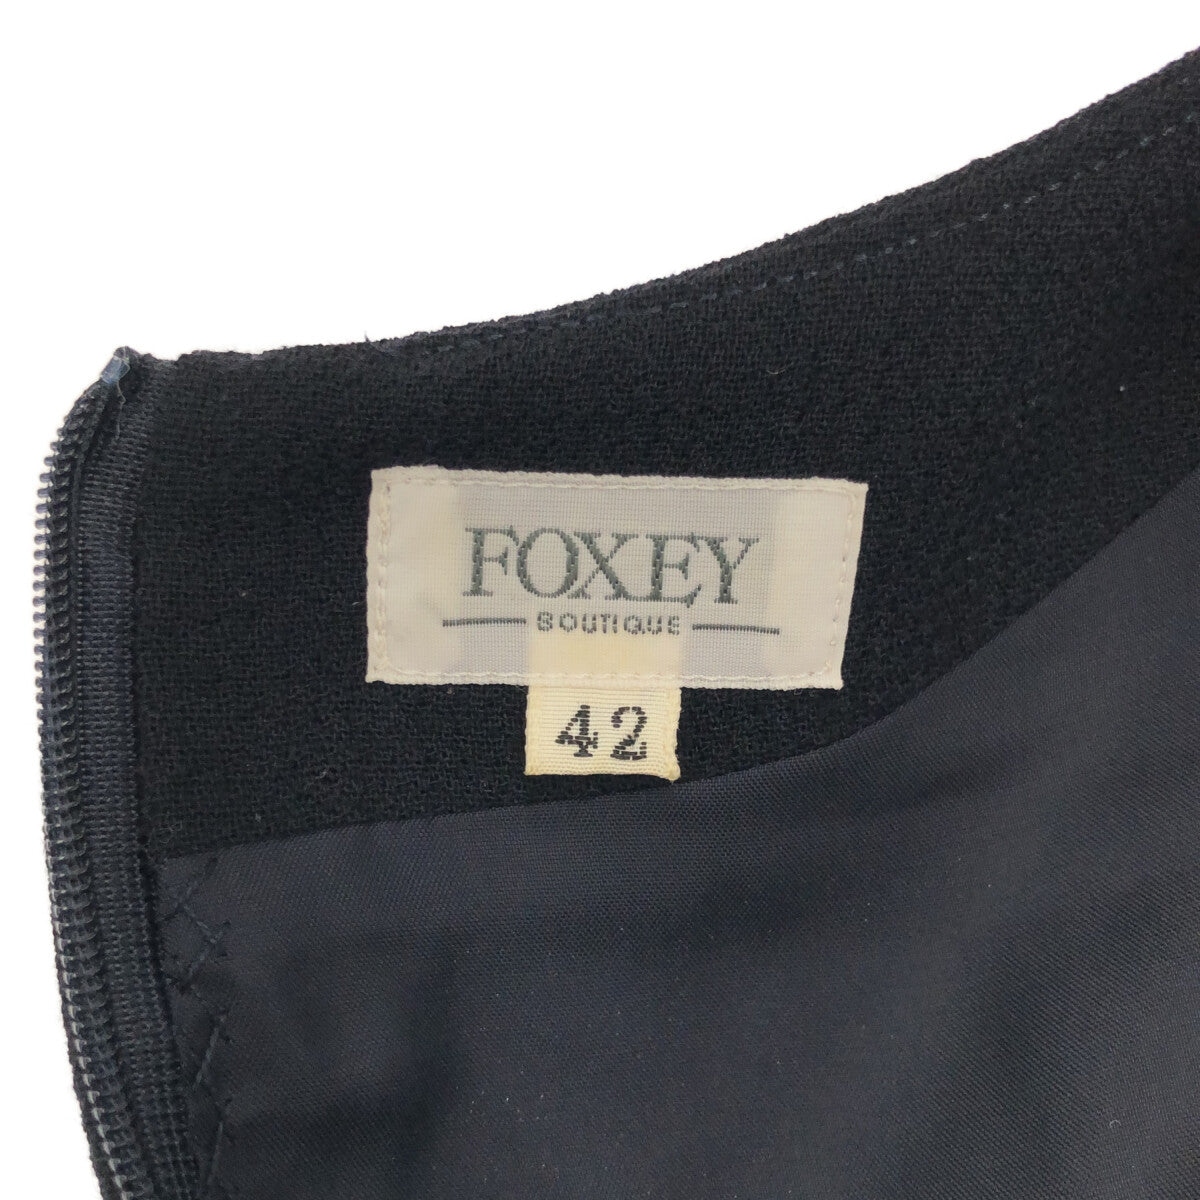 FOXEY ワンピース 42